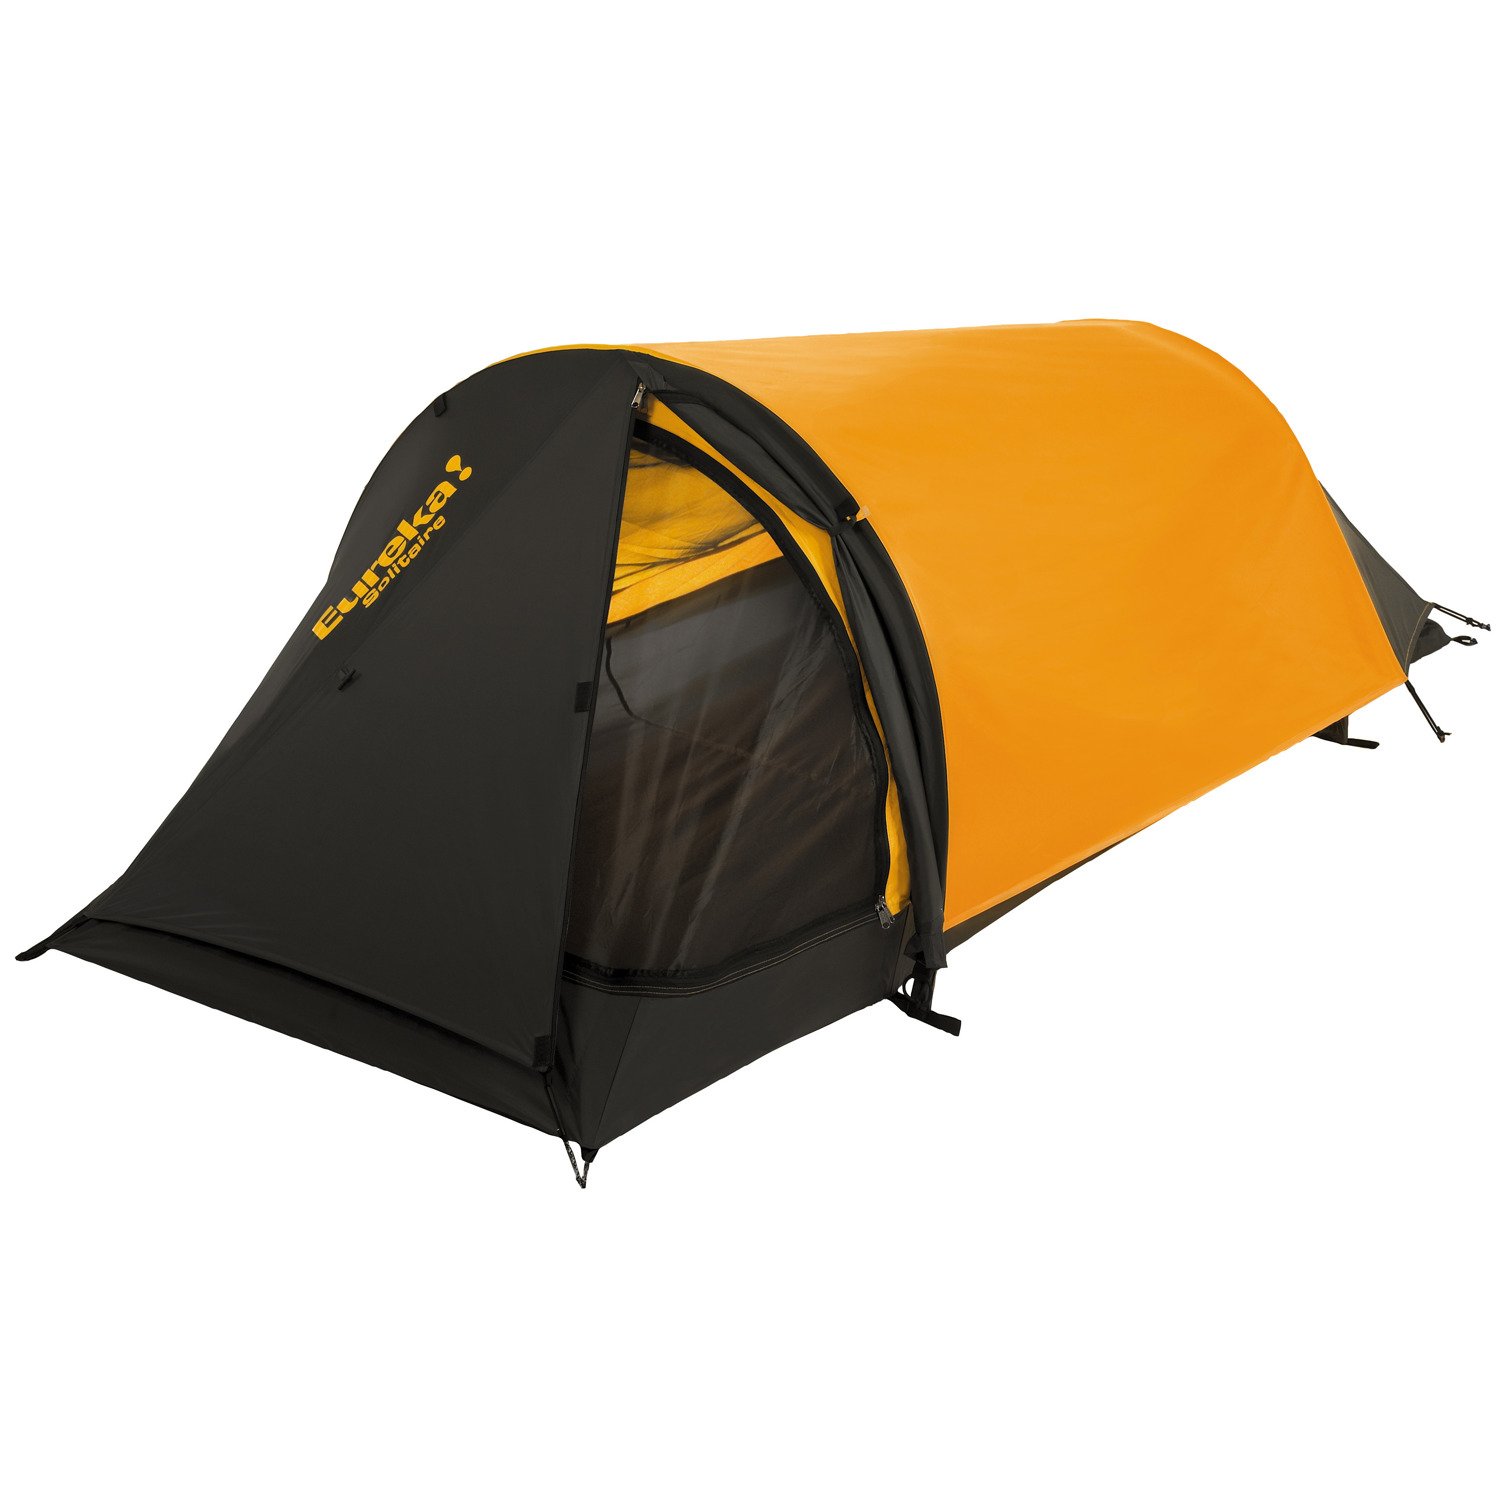 Eureka! Solitaire One-Person, Three-Season Backpacking Bivy Style Tent